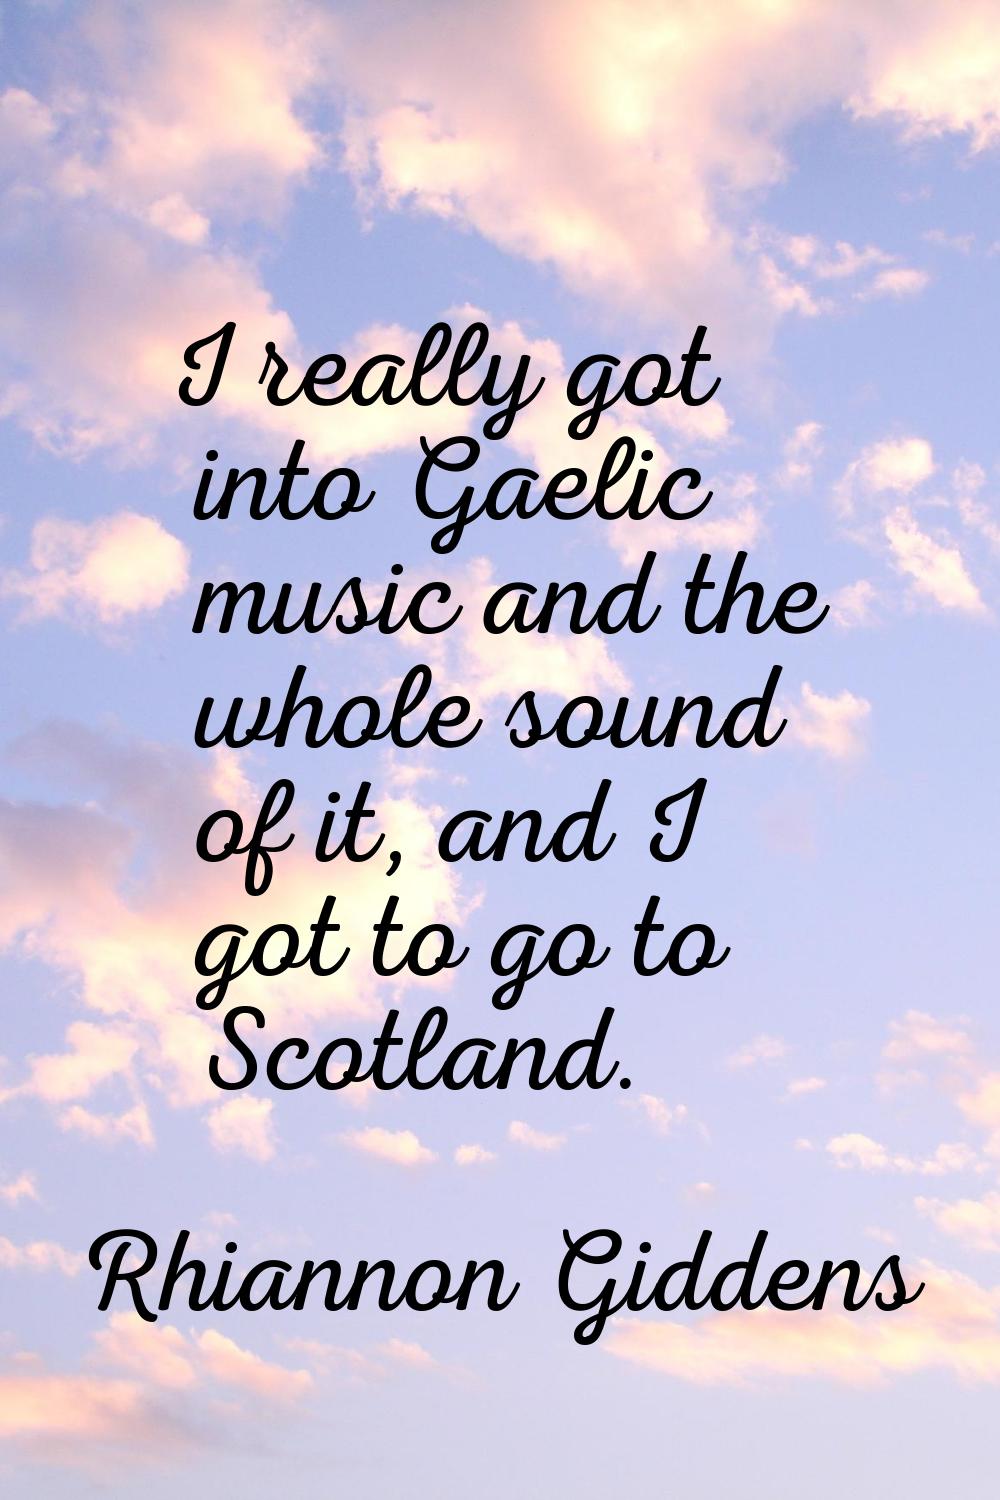 I really got into Gaelic music and the whole sound of it, and I got to go to Scotland.